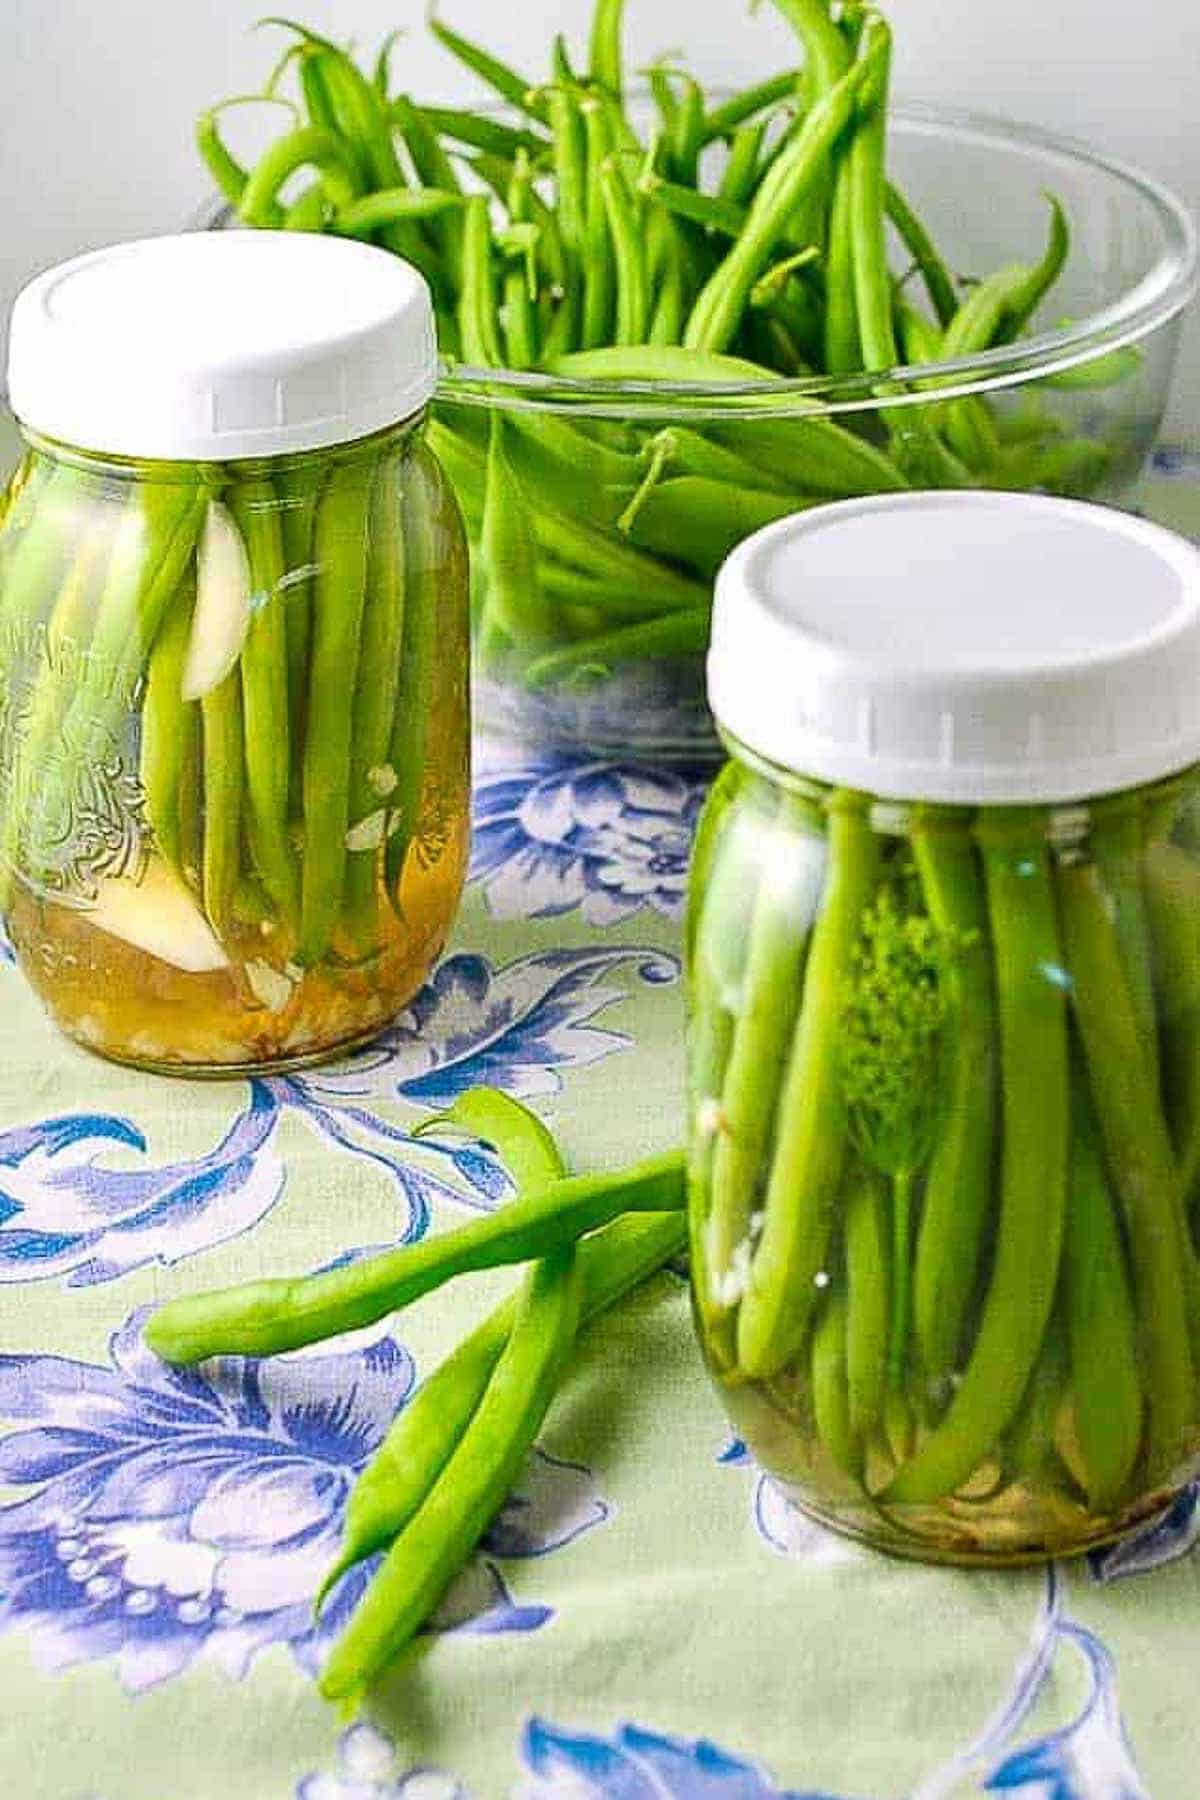 Two jars of refrigerator pickled green beans with a bowl of fresh beans in the background.